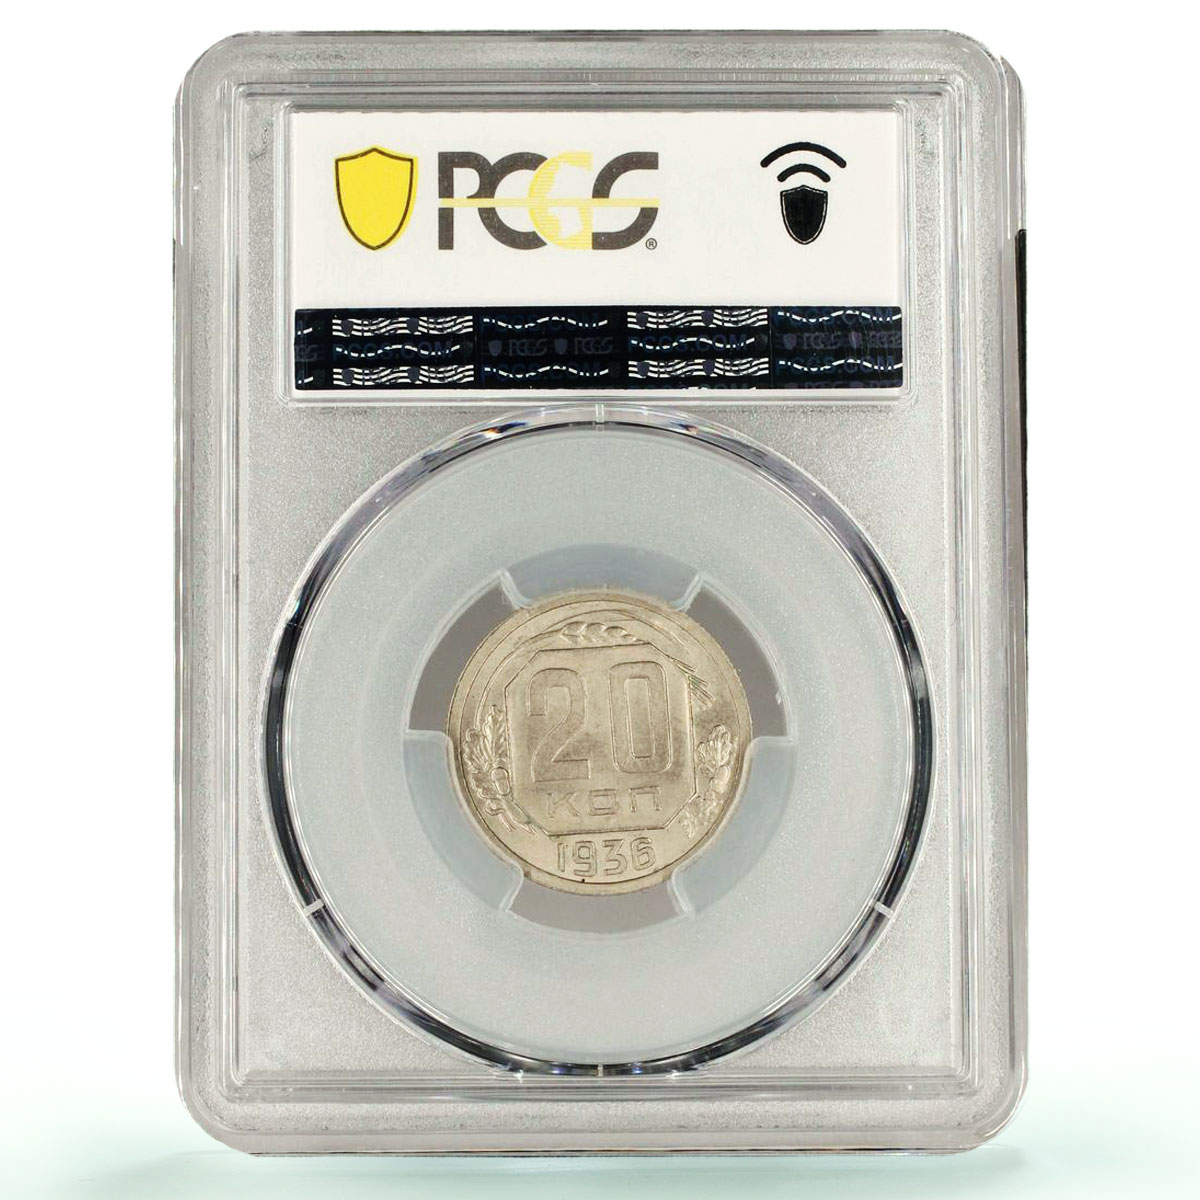 Russia USSR RSFSR 20 kopecks Regular Coinage Y-104 MS64 PCGS CuNi coin 1936